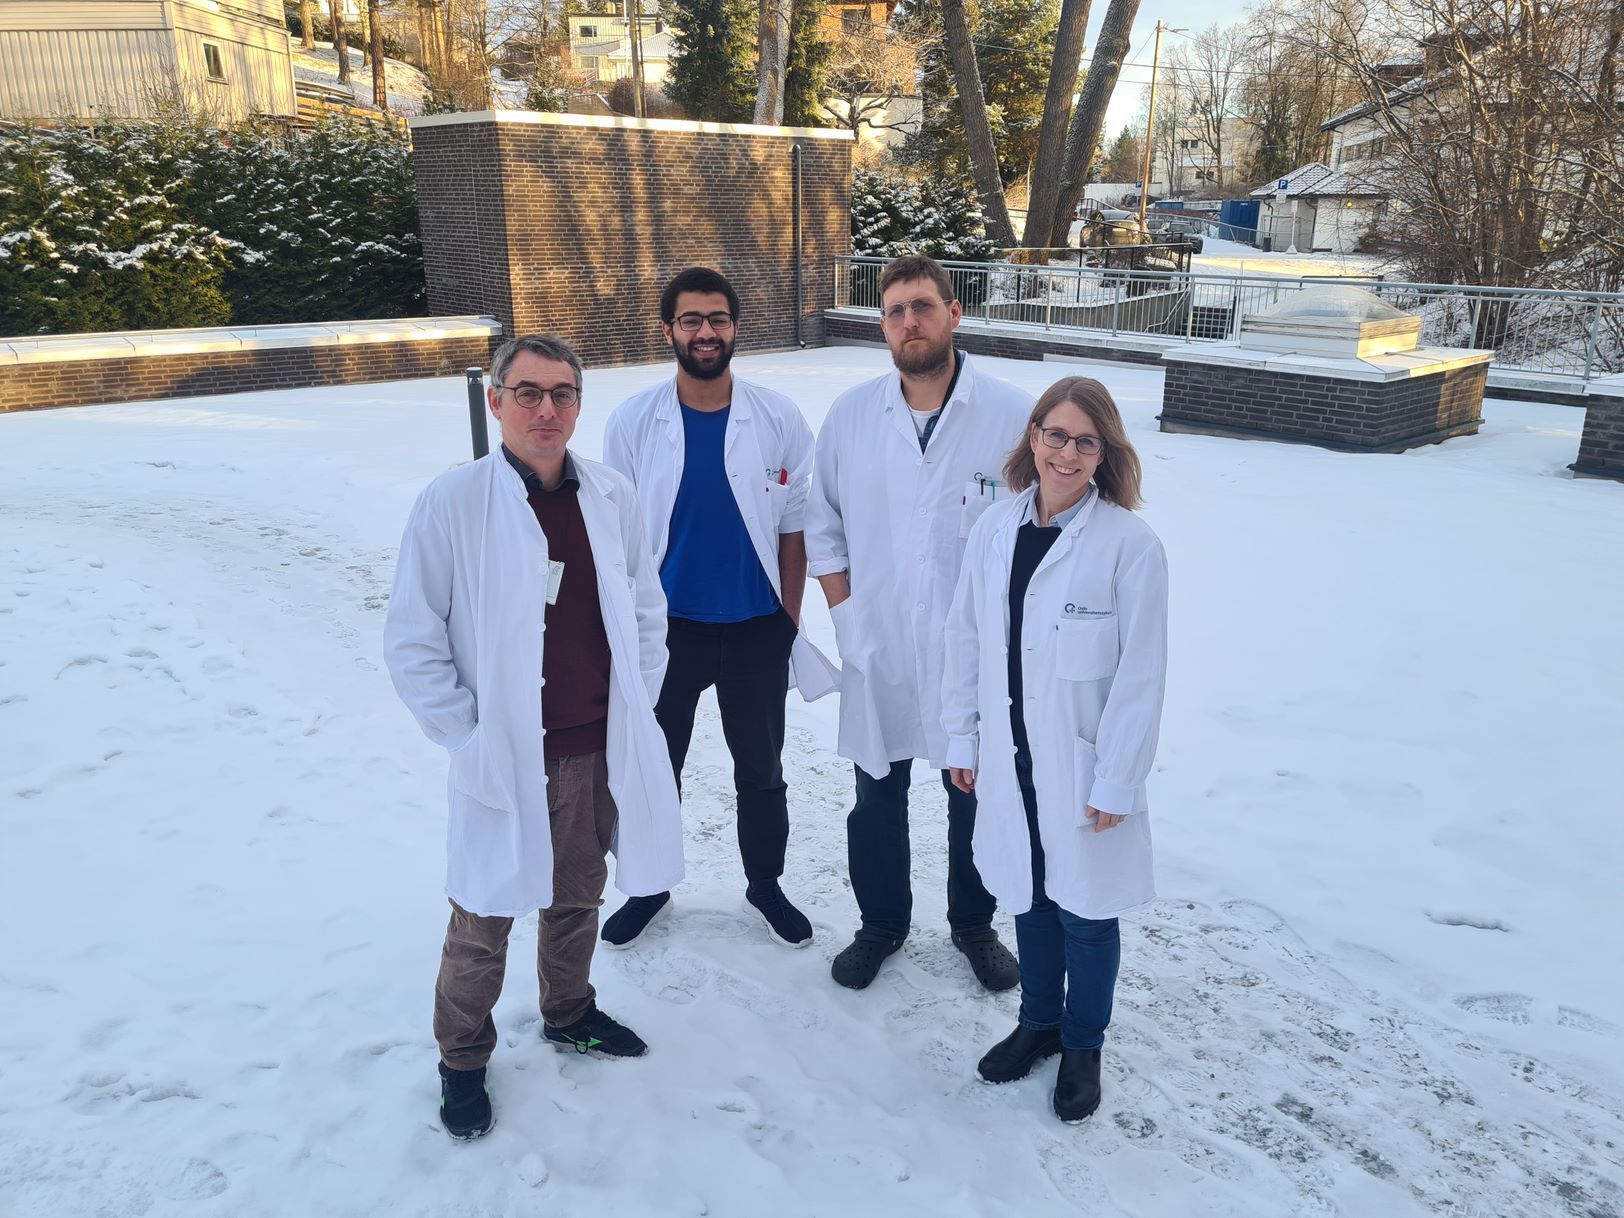 The research team at Oslo University Hospital involved in ALTERCAR. From left Senior researcher Sébastien Wälchli (group leader), Christopher Forcados (PhD student), Stefano Bradamante (Special engineer) and Else Marit Inderberg (Head of Unit).